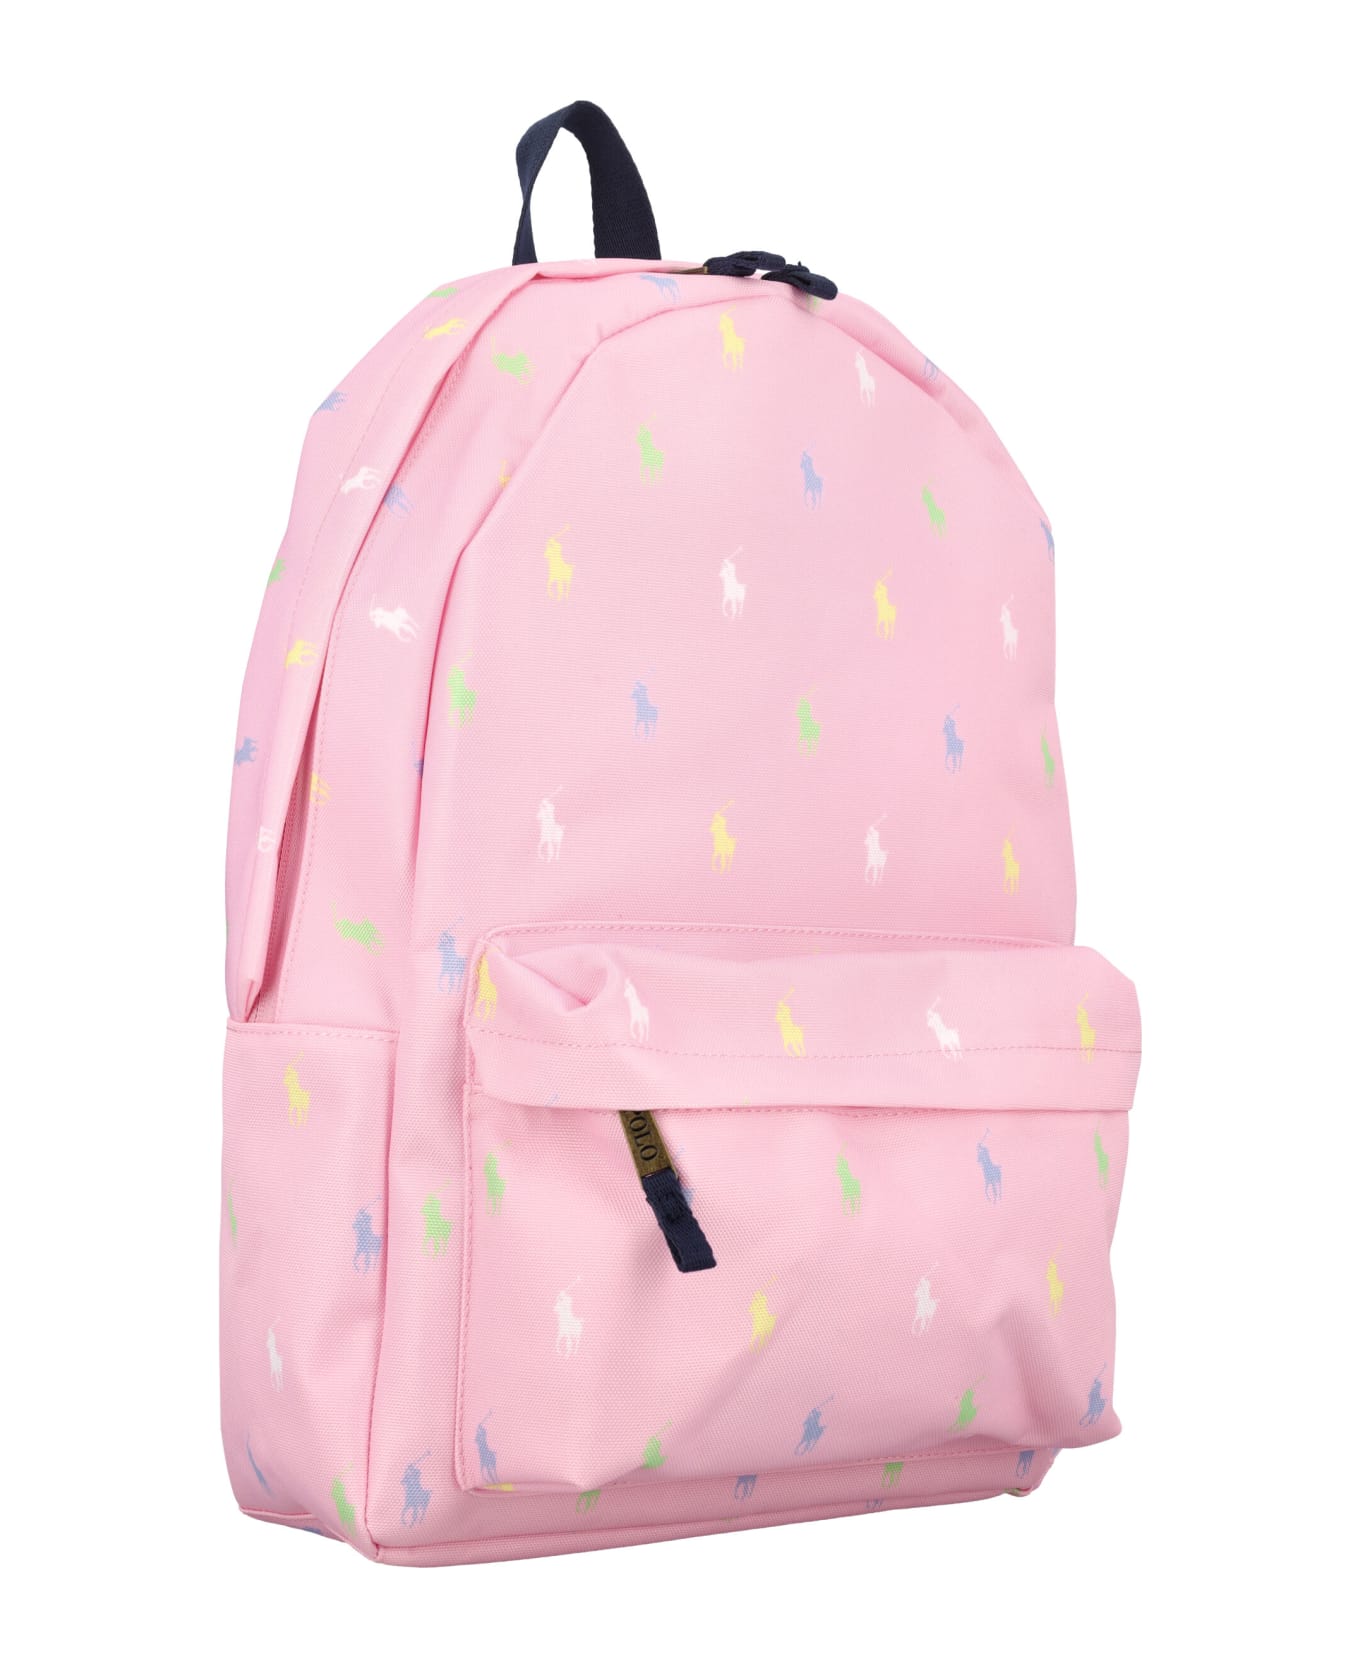 Polo Ralph Lauren Backpack Pony - PINK アクセサリー＆ギフト